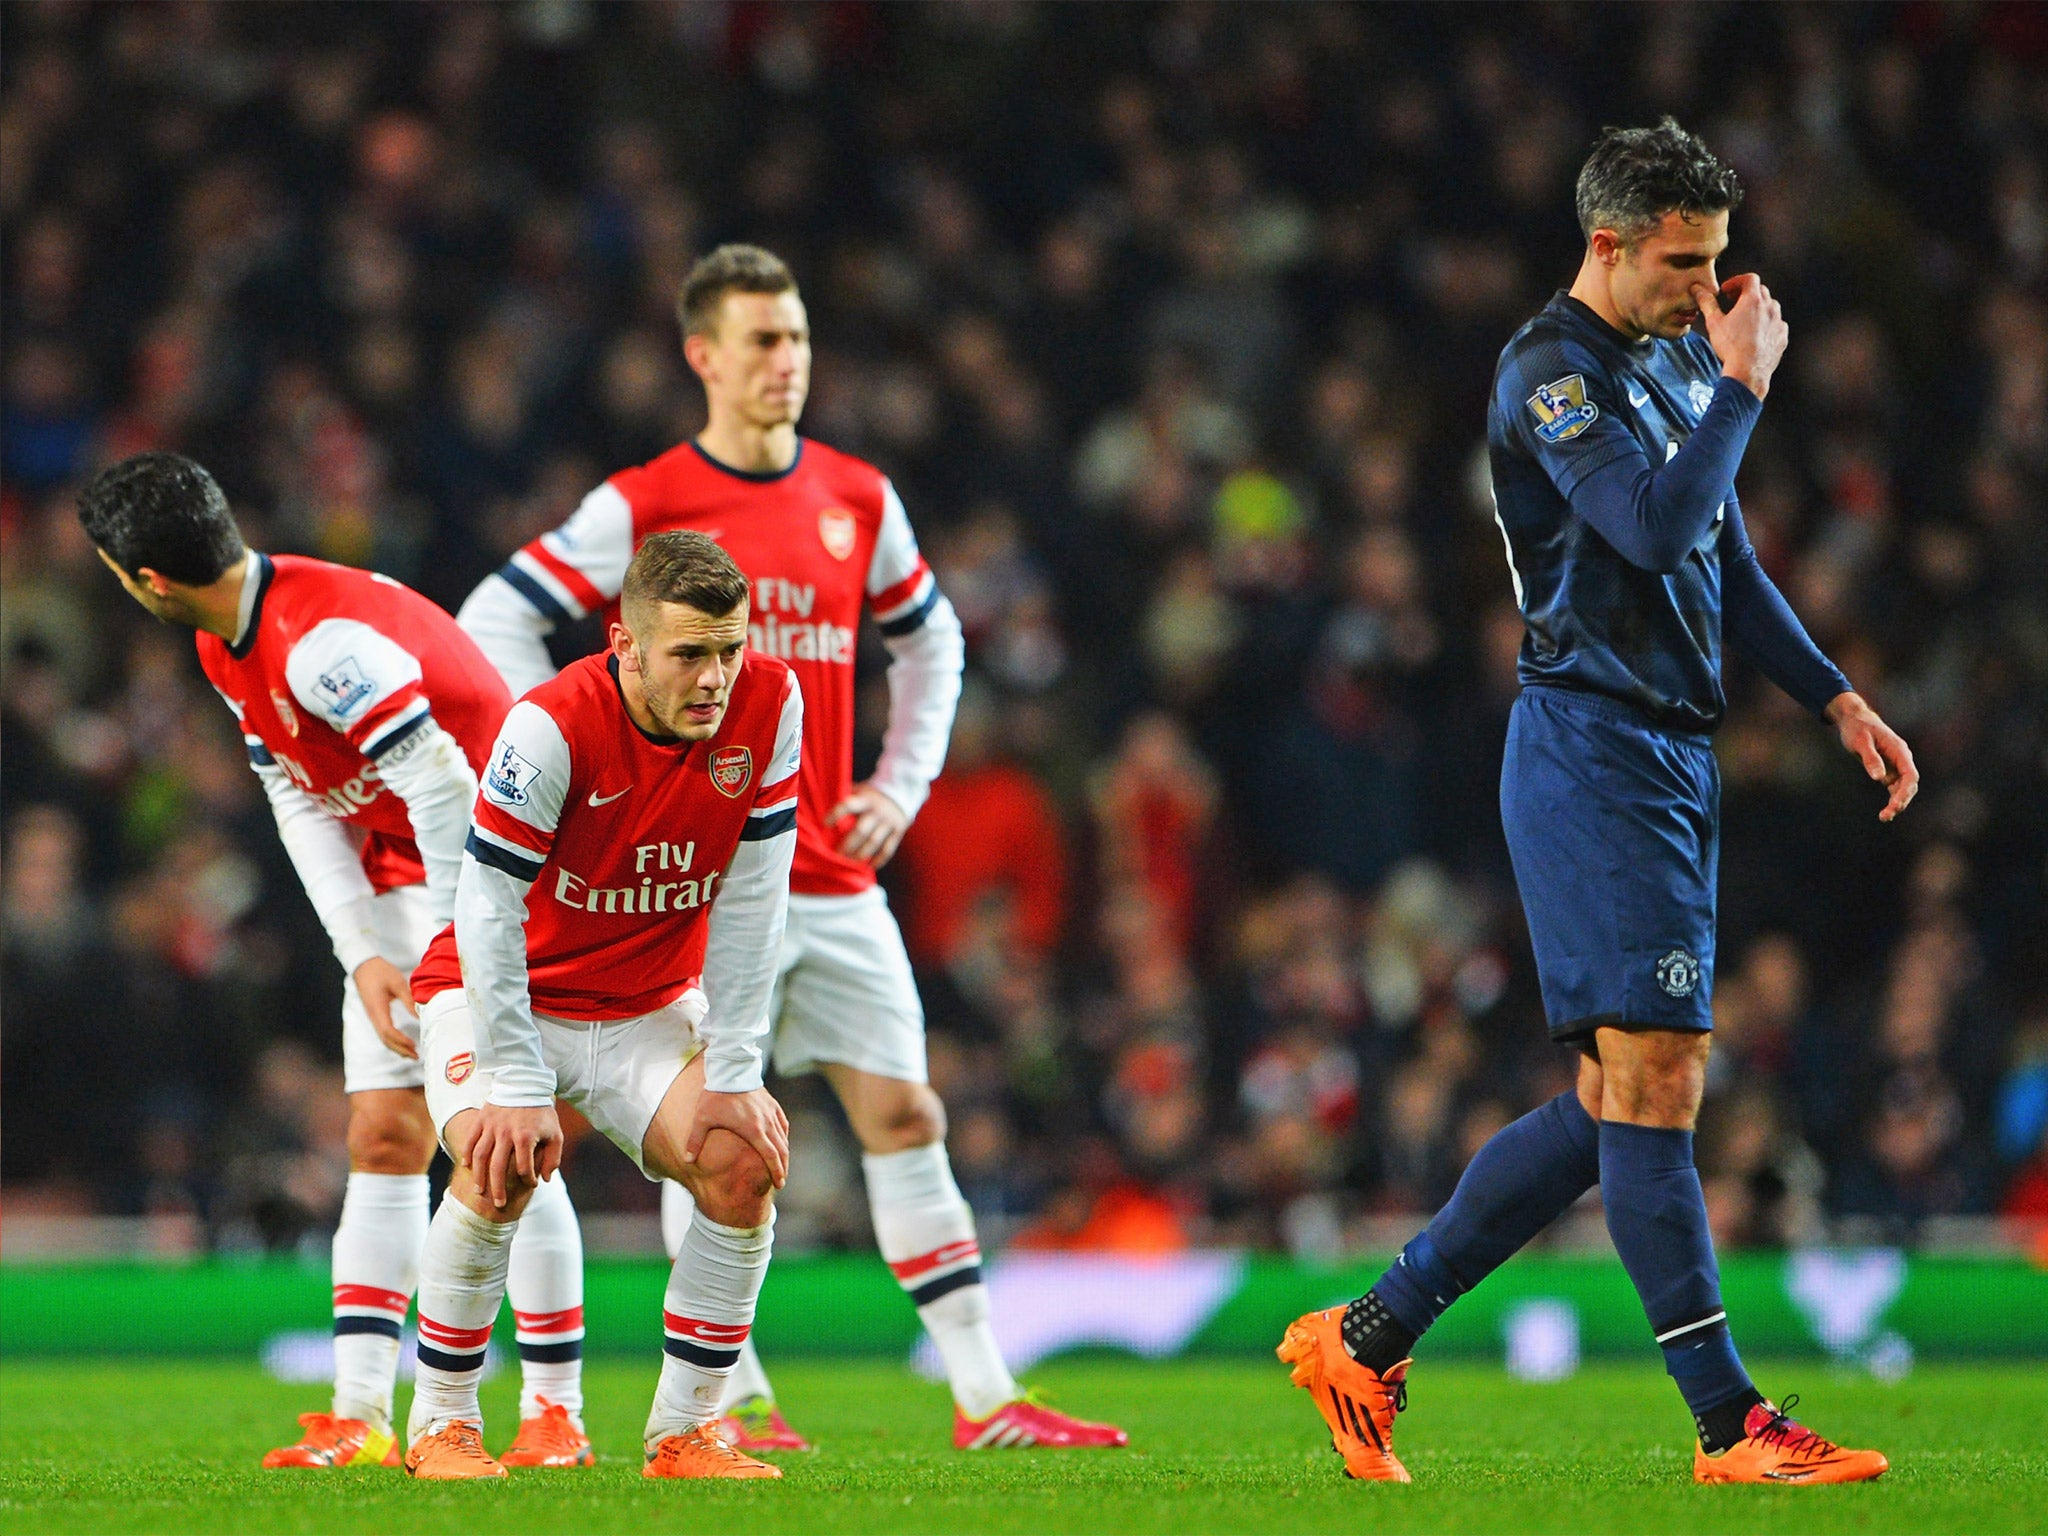 Arsenal players, current and former, endured a frustrating evening at the Emirates